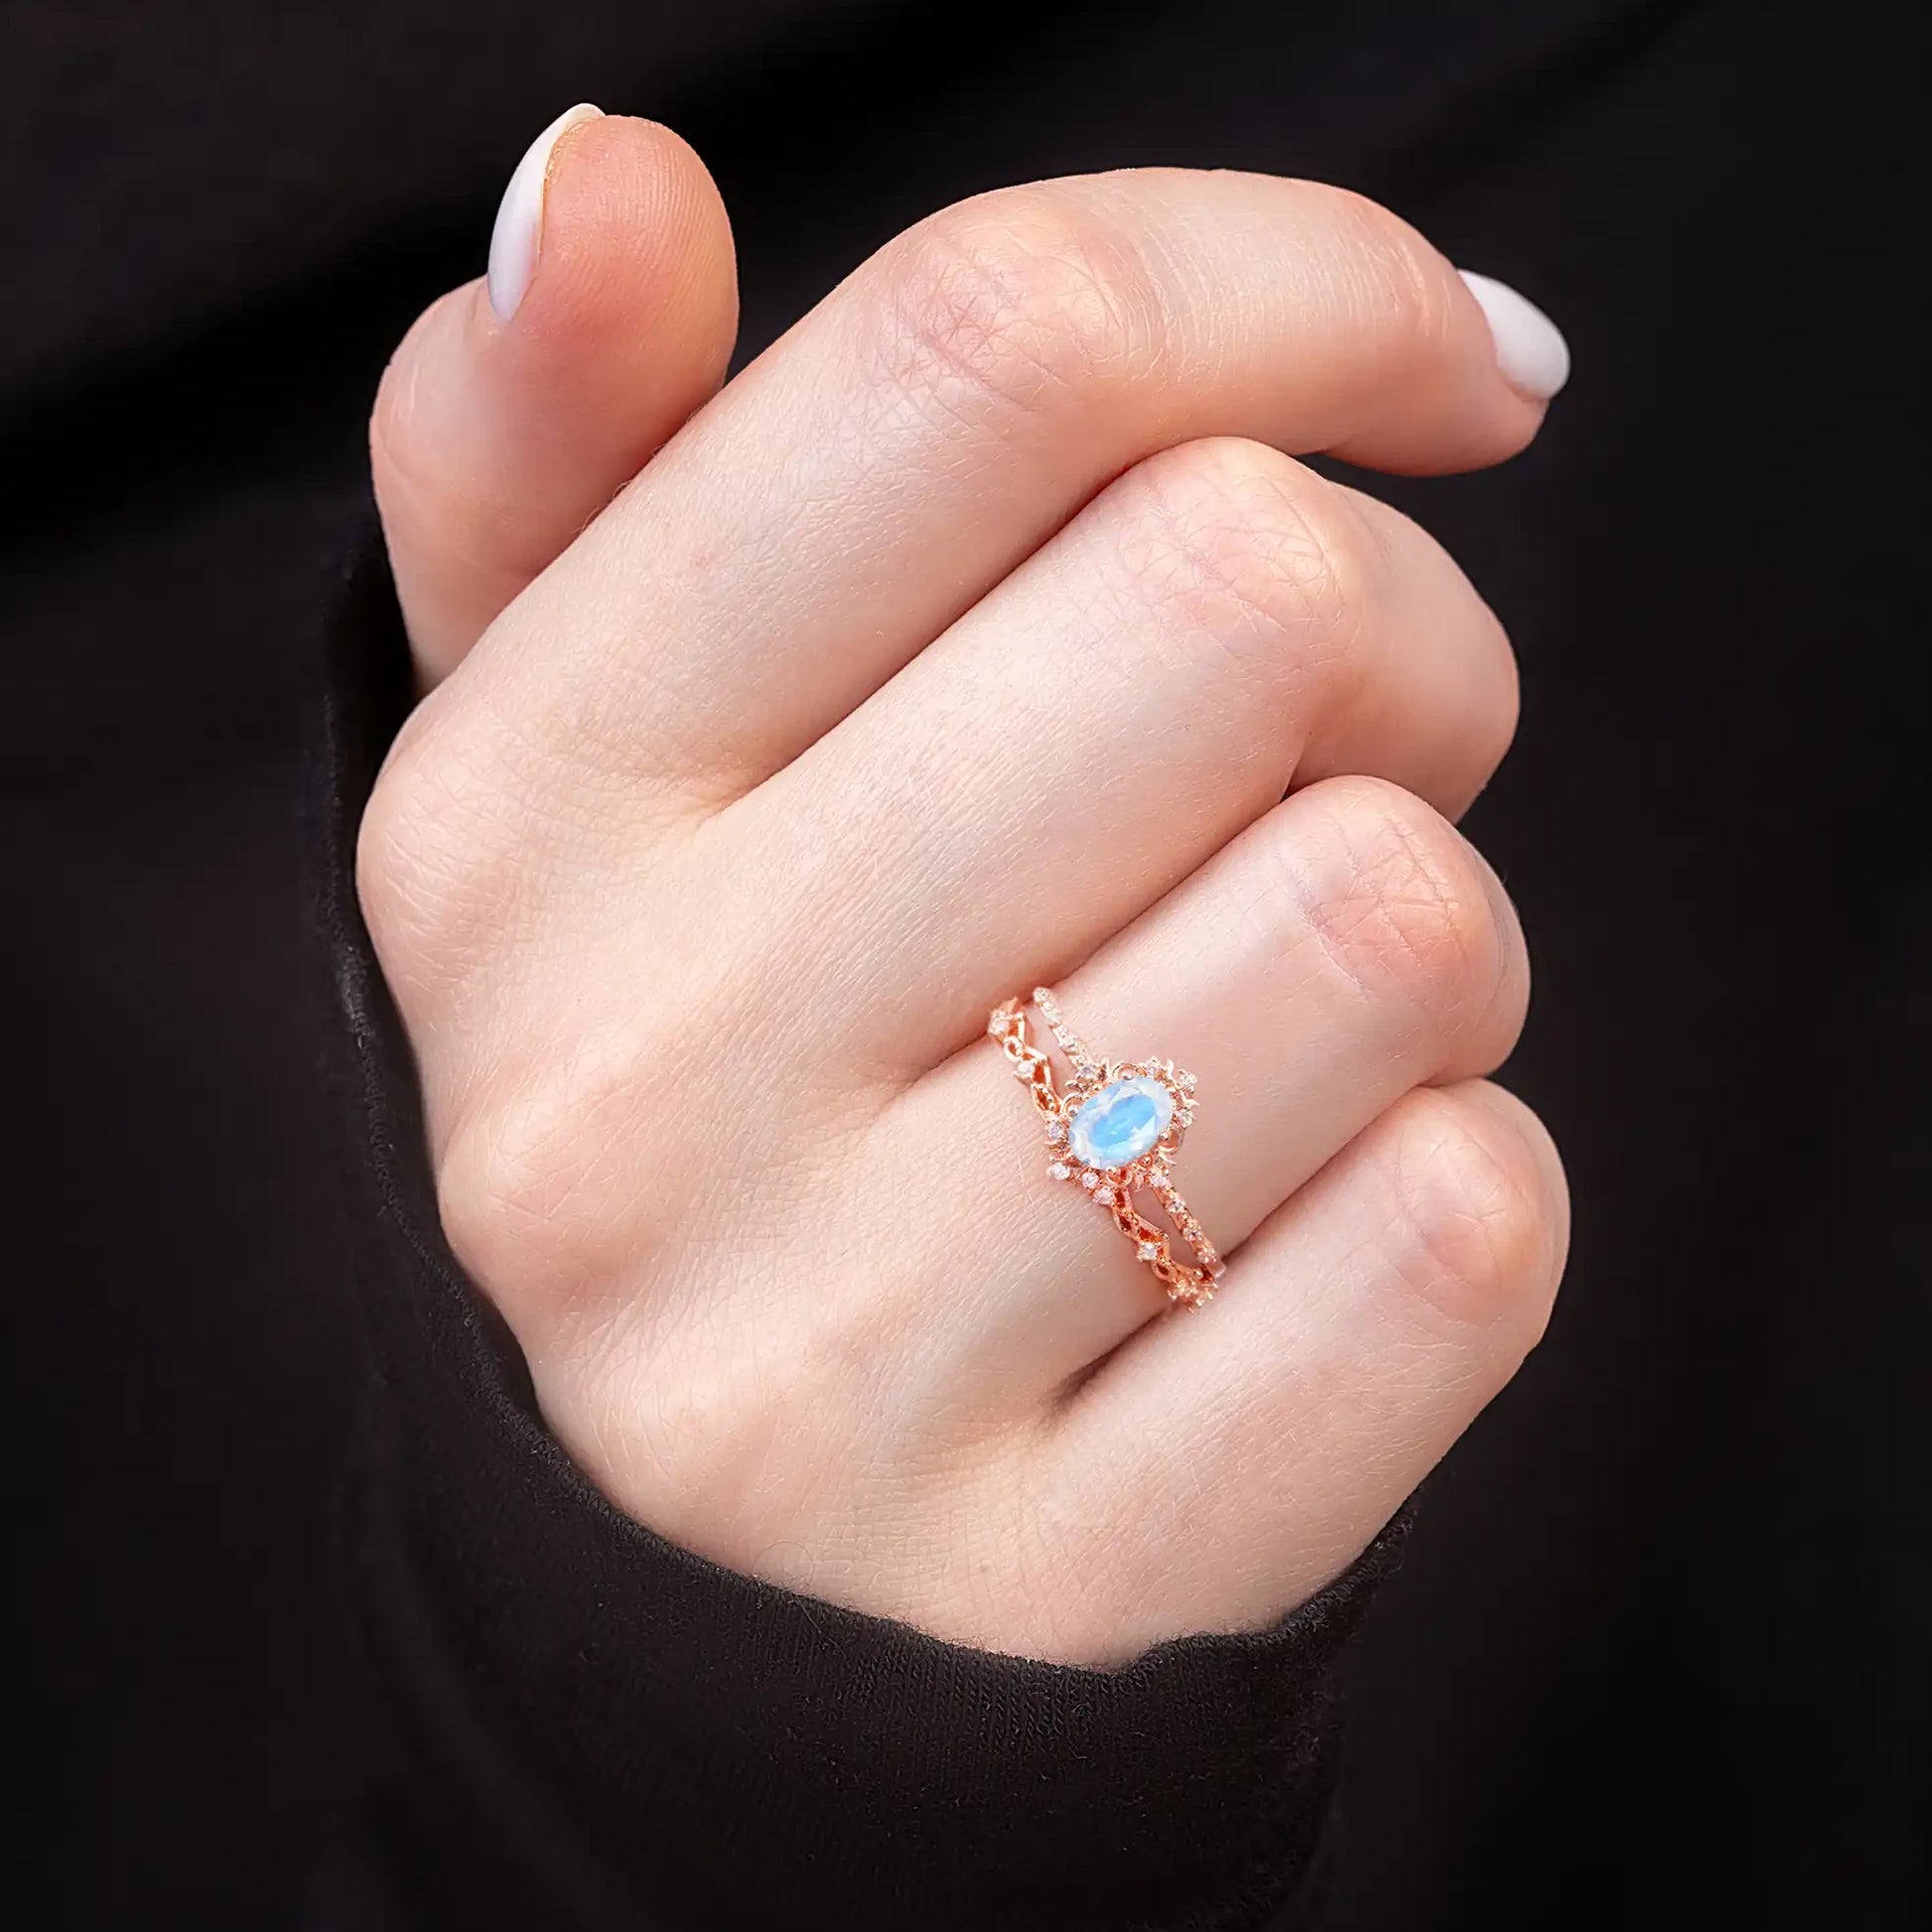 Vintage Moonstone ring set on a woman's hand